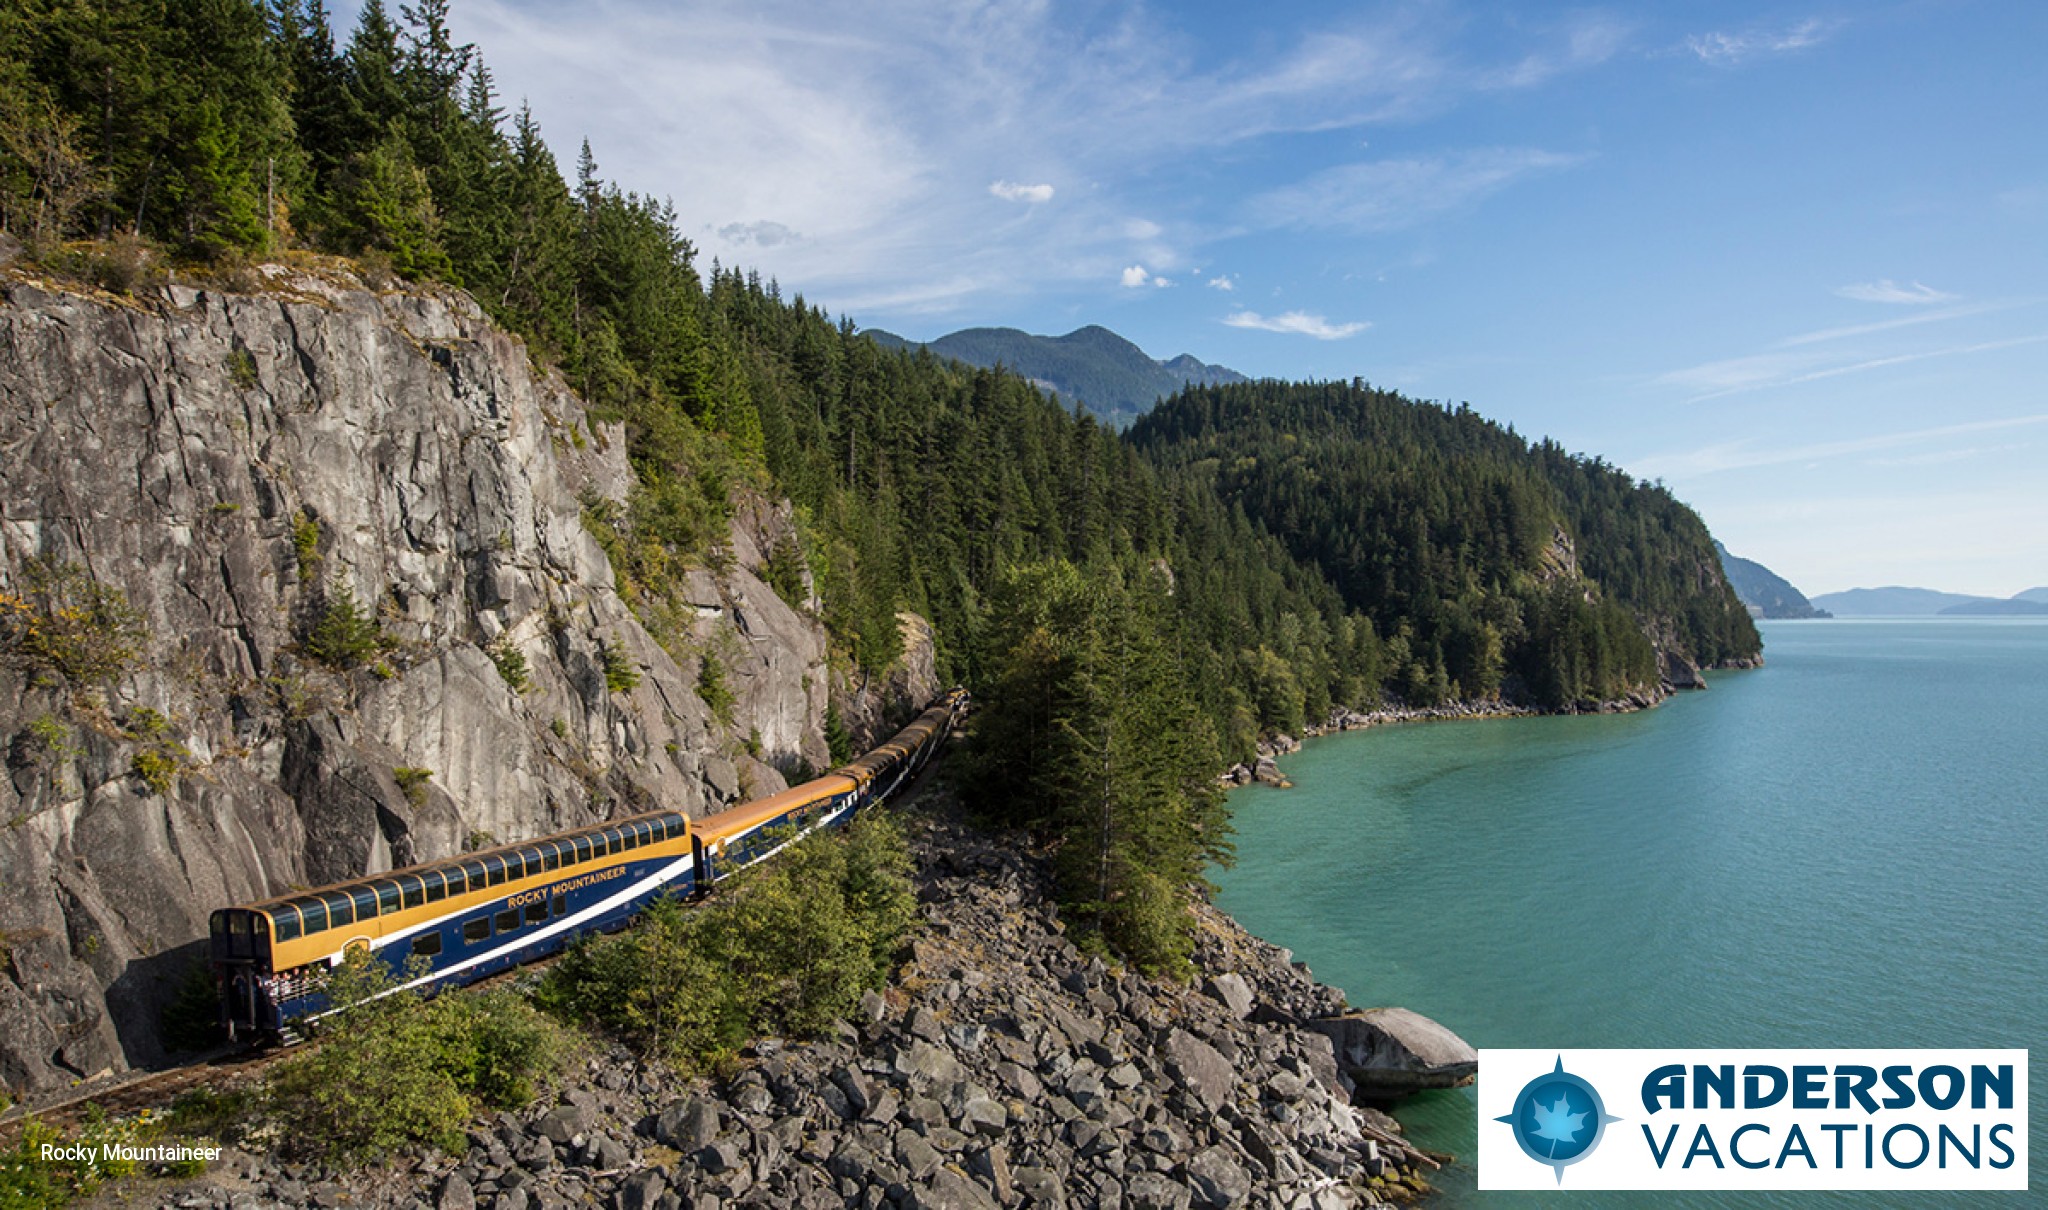 Rail journey from Vancouver to Whistler - Sea to Sky route